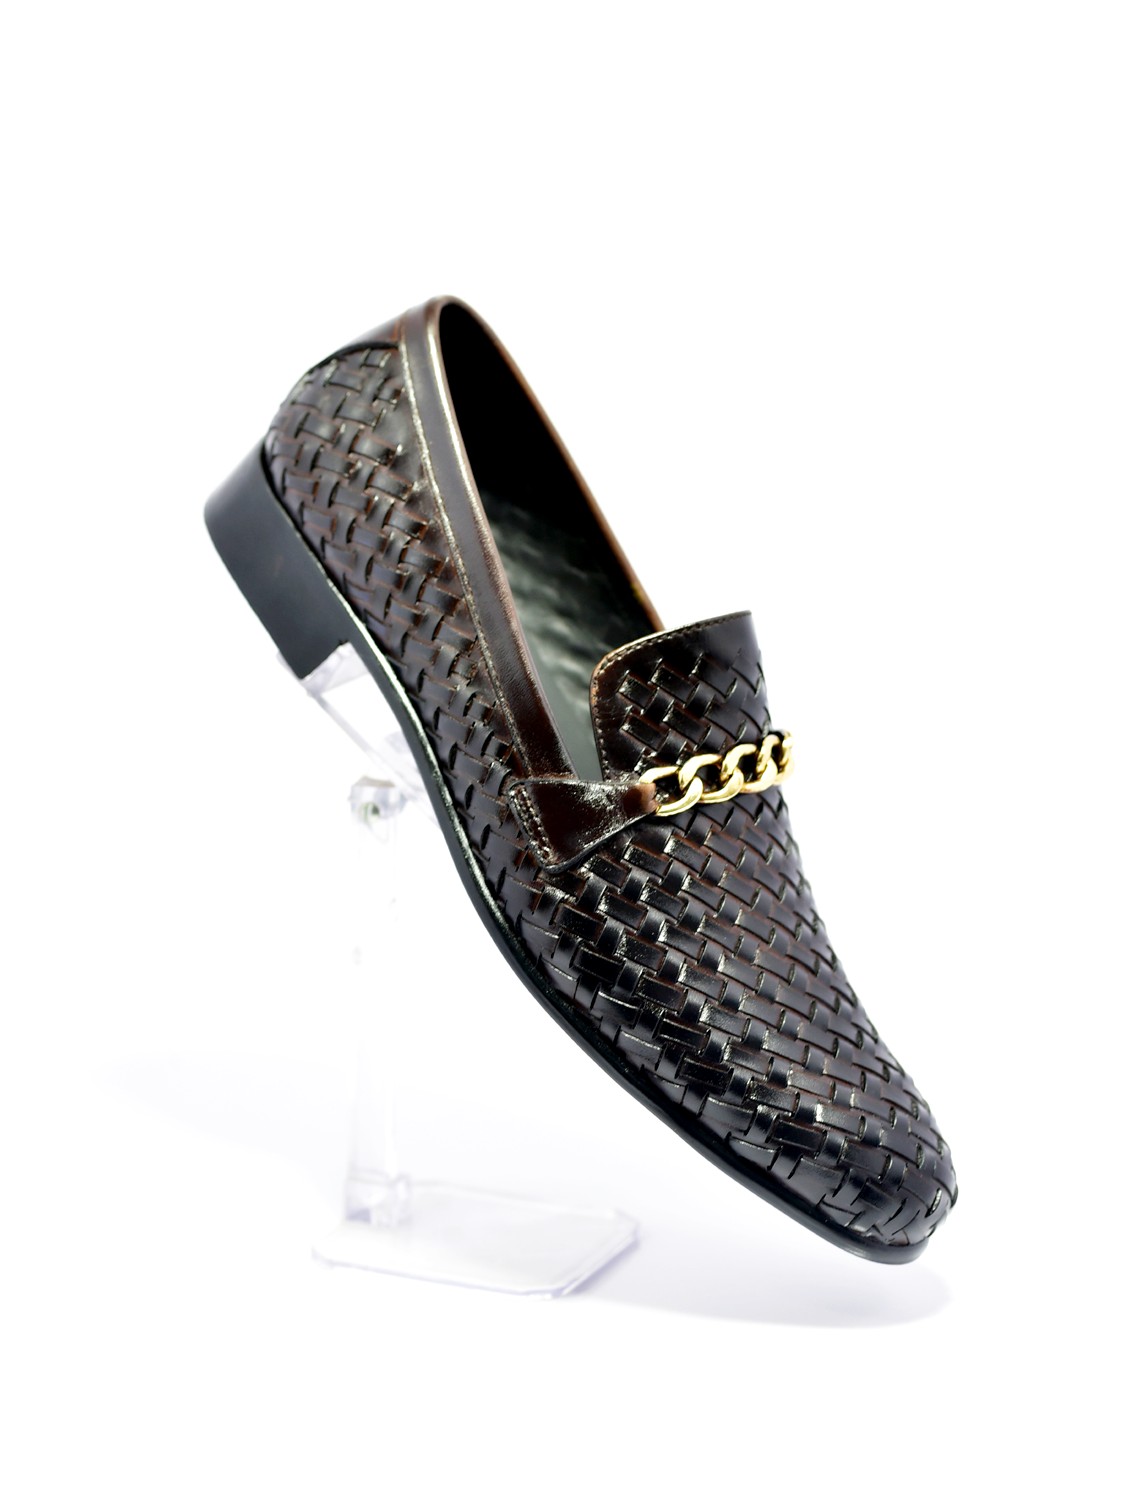 Handcrafted Fully Knitted Leather Shoes With Buckle And Leather Sole -  Frenzy